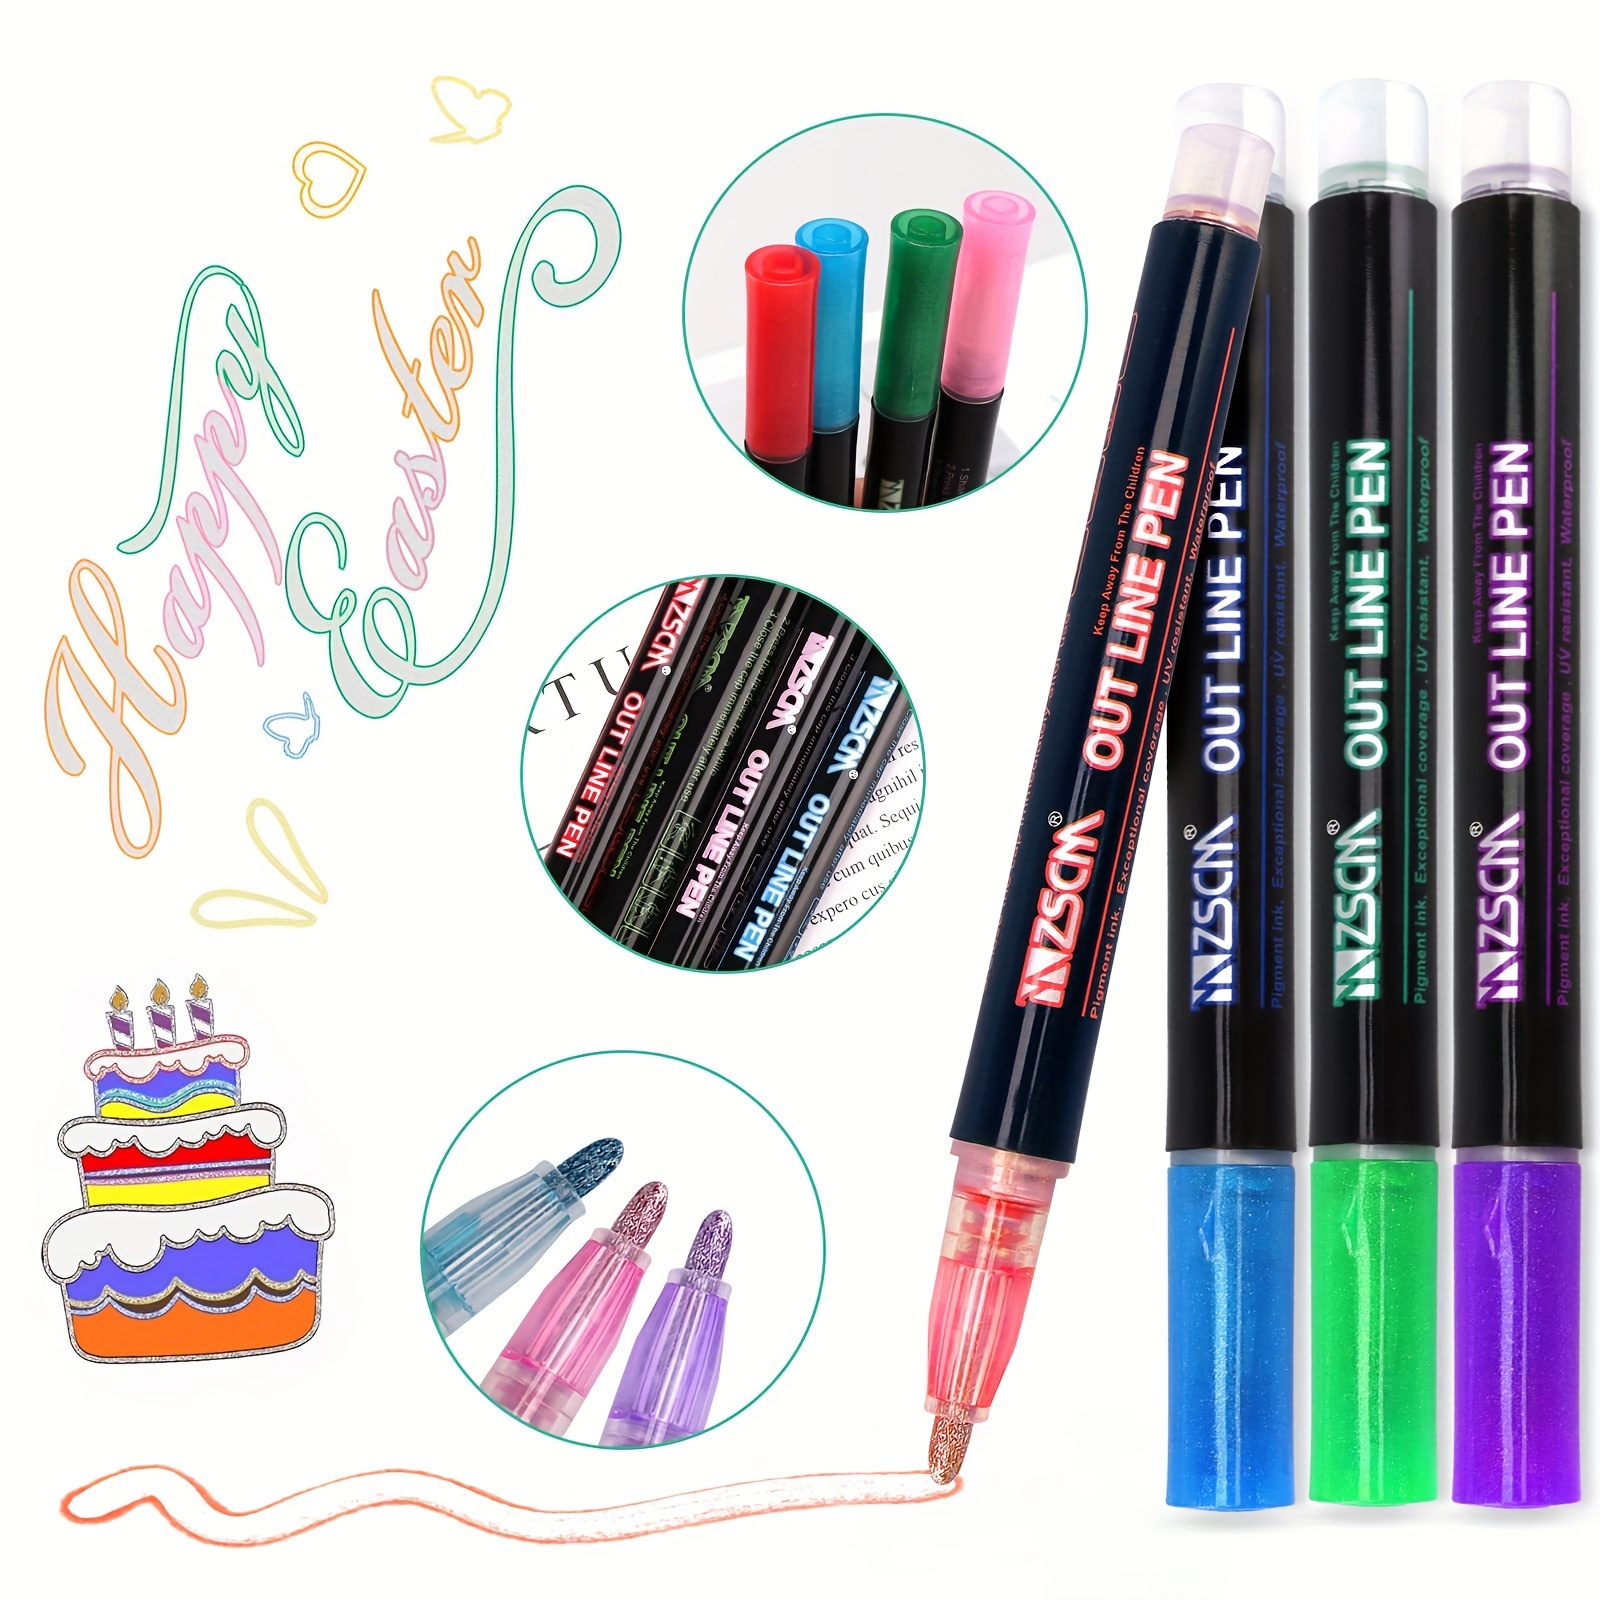 SDJMa Double Line Outline Markers, 12 Colors Squiggles Shimmer Markers Set,  Self Outline Metallic Marker Pens for Art, Drawing, Doodling, Card Making,  Christmas Greeting Card, DIY Crafts 